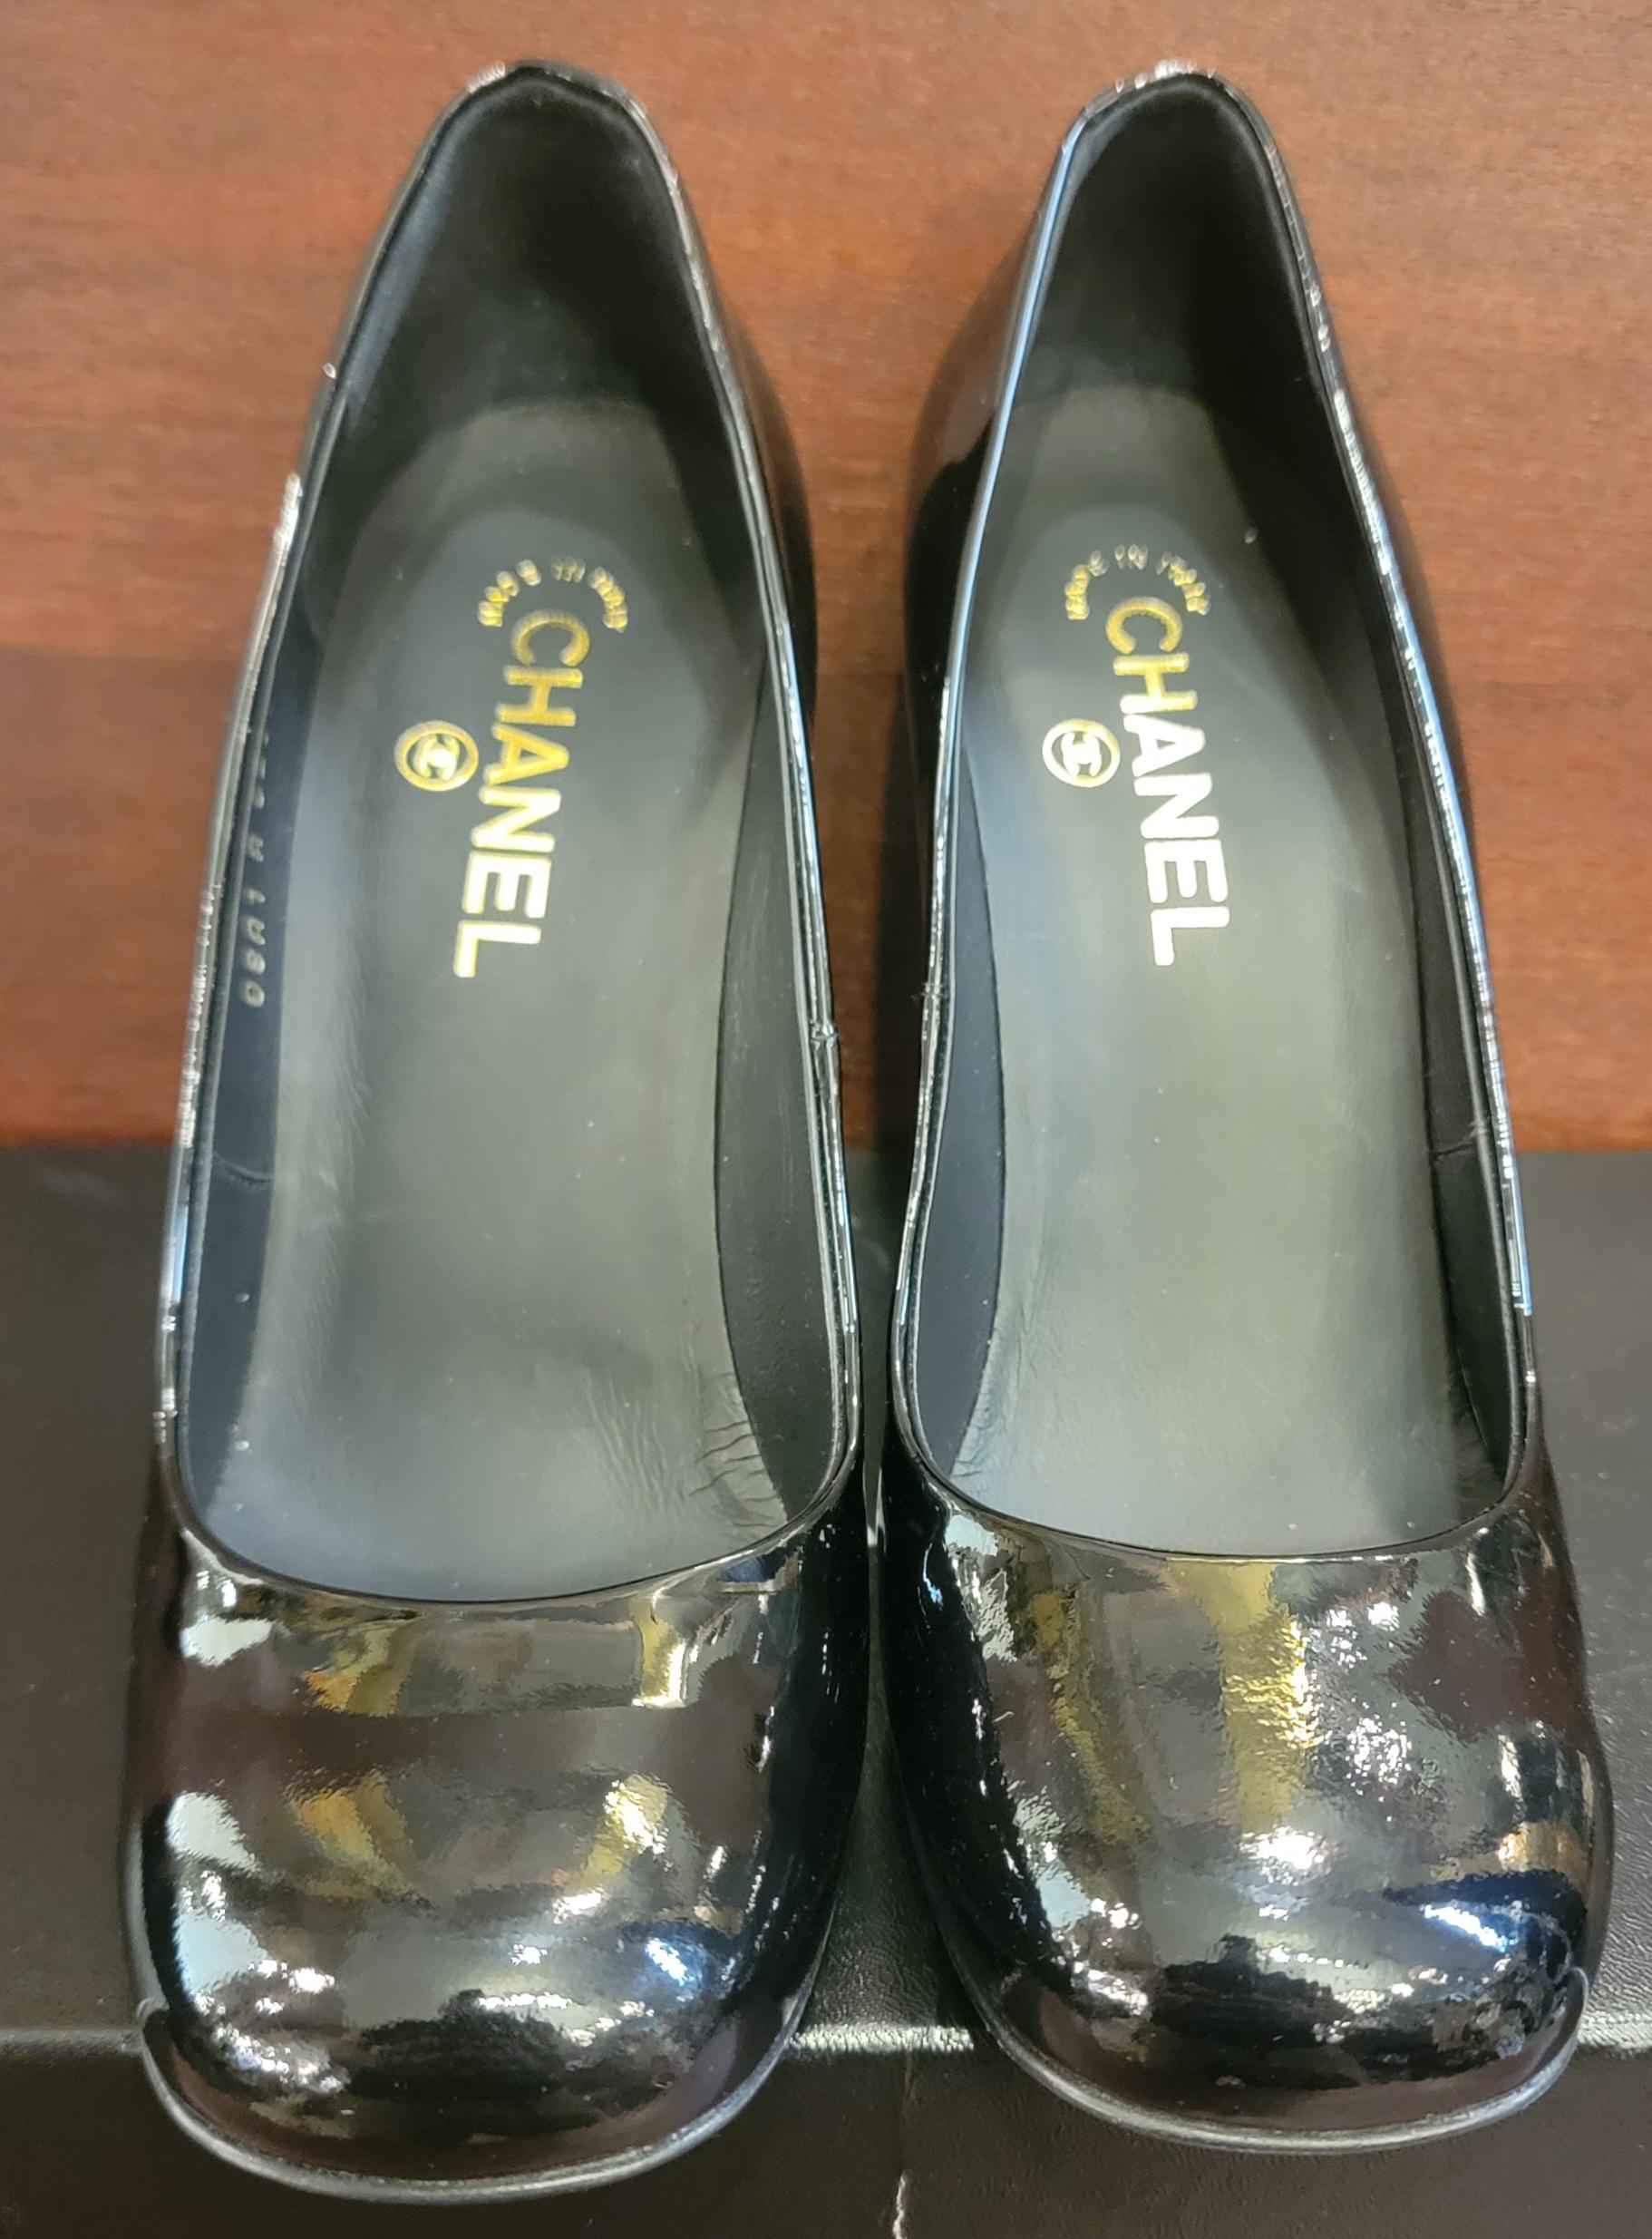 Black Authentic Brand New Chanel size 39.5 High Heel Shoes with Chanel Gold Accent For Sale